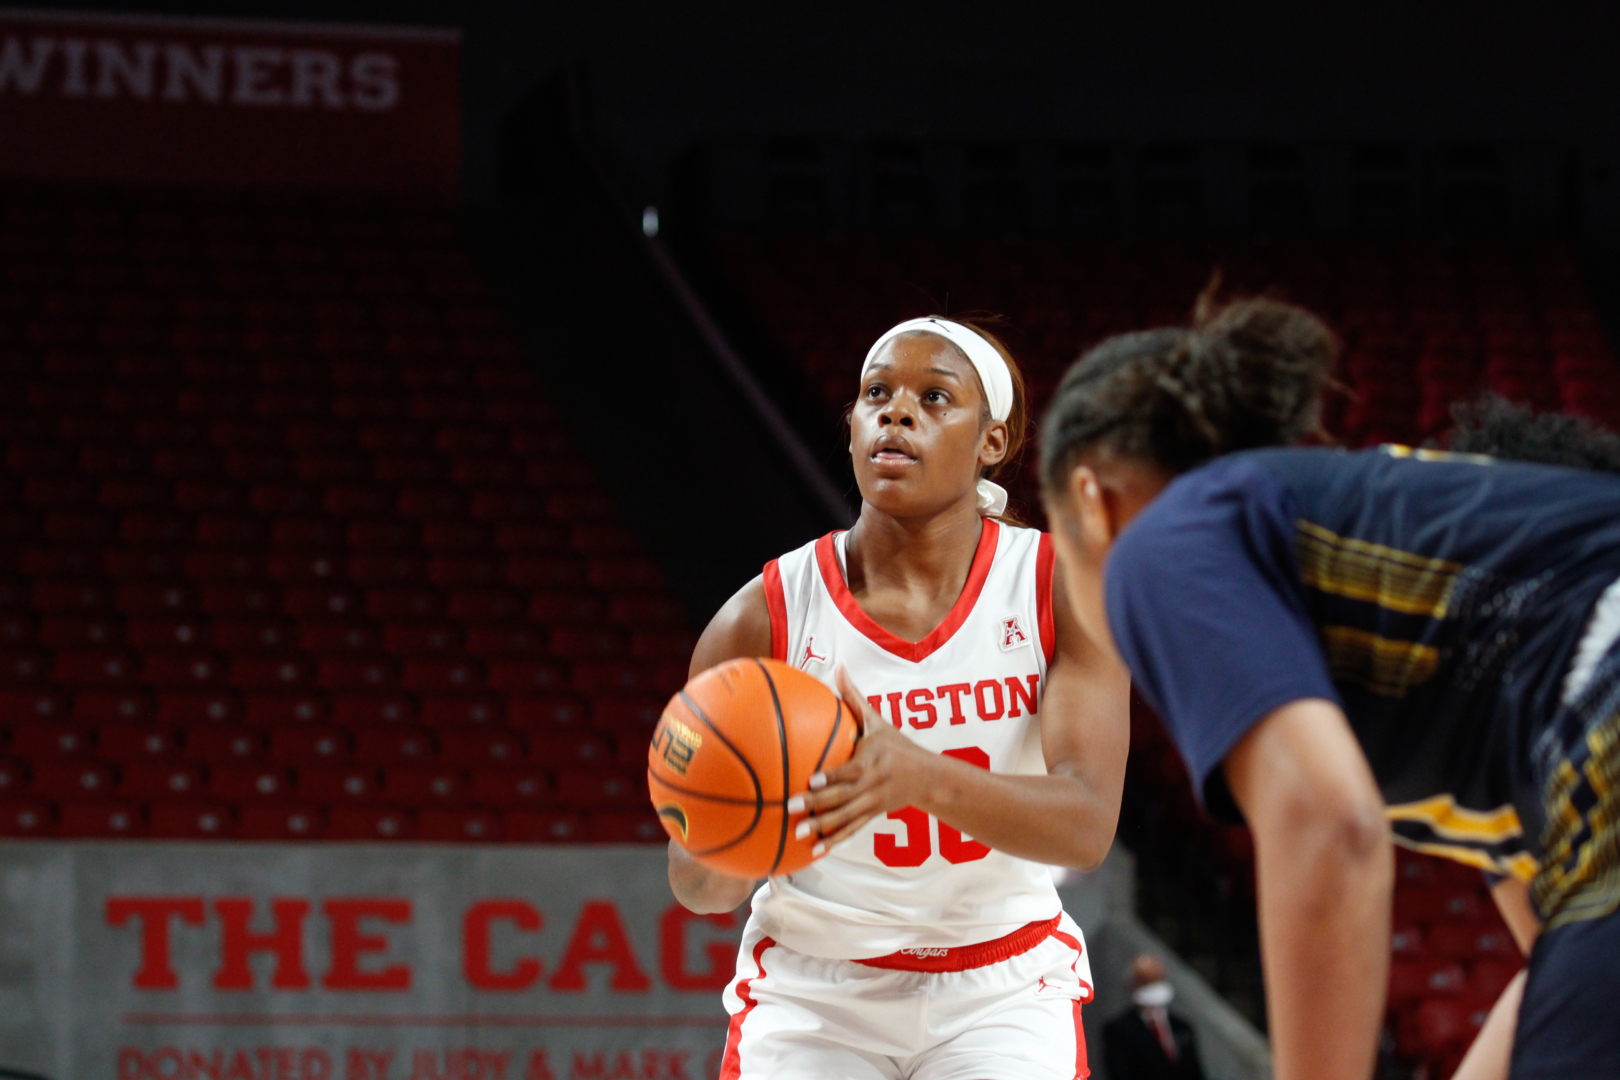 UH forward Tatyana Hill finished one rebound shy of a double-double as she recorded 15 points and nine rebounds in the Cougars win over Texas A&M-Corpus Christi on Tuesday afternoon. | Esther Umoh/The Cougar